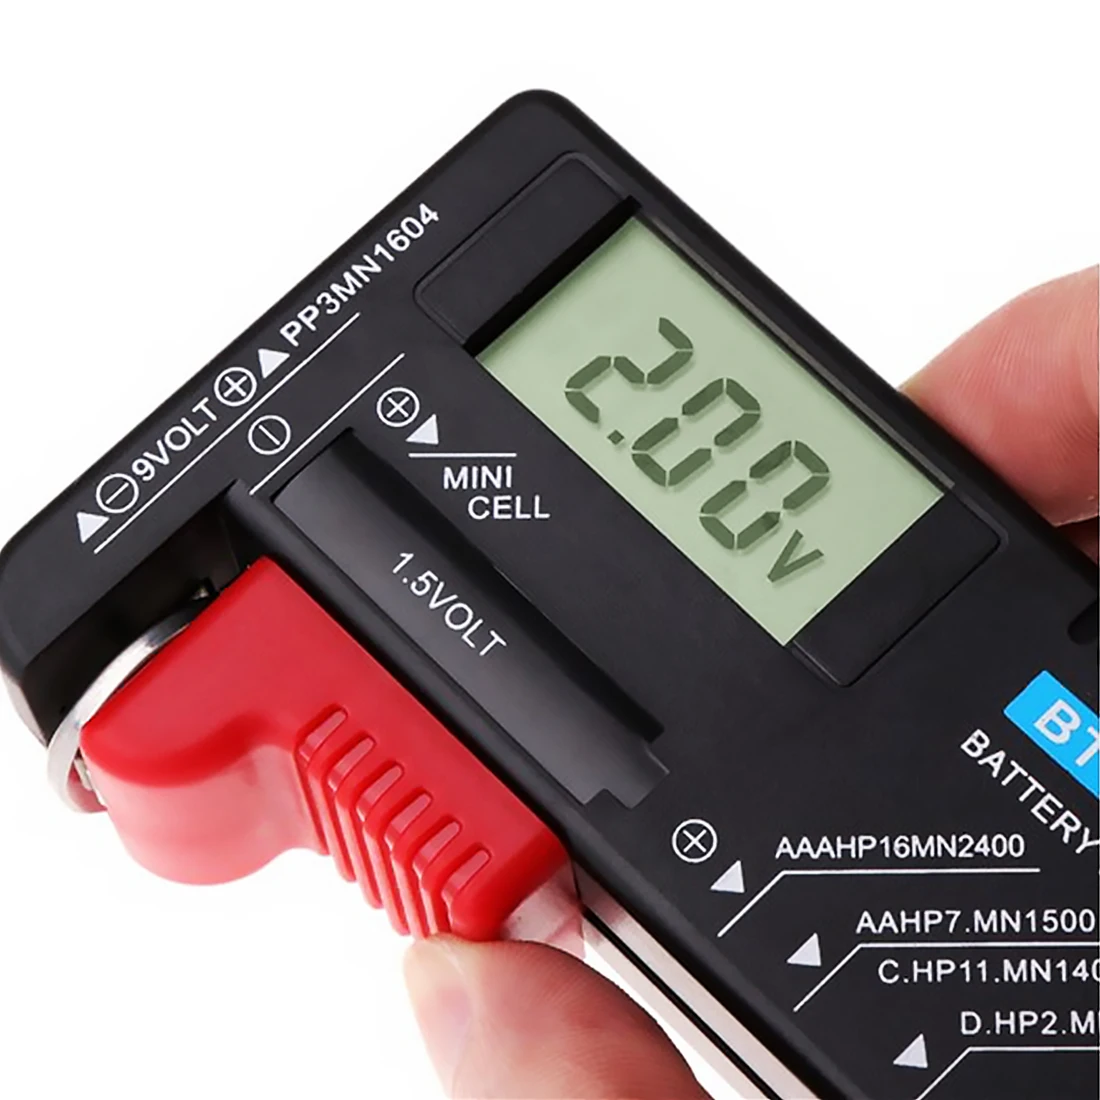 

Hot BT-168 PRO AA/AAA/C/D/9/1.5V batteries Universal Button Cell Battery Colour Coded Meter Indicate Volt Tester Checker Power